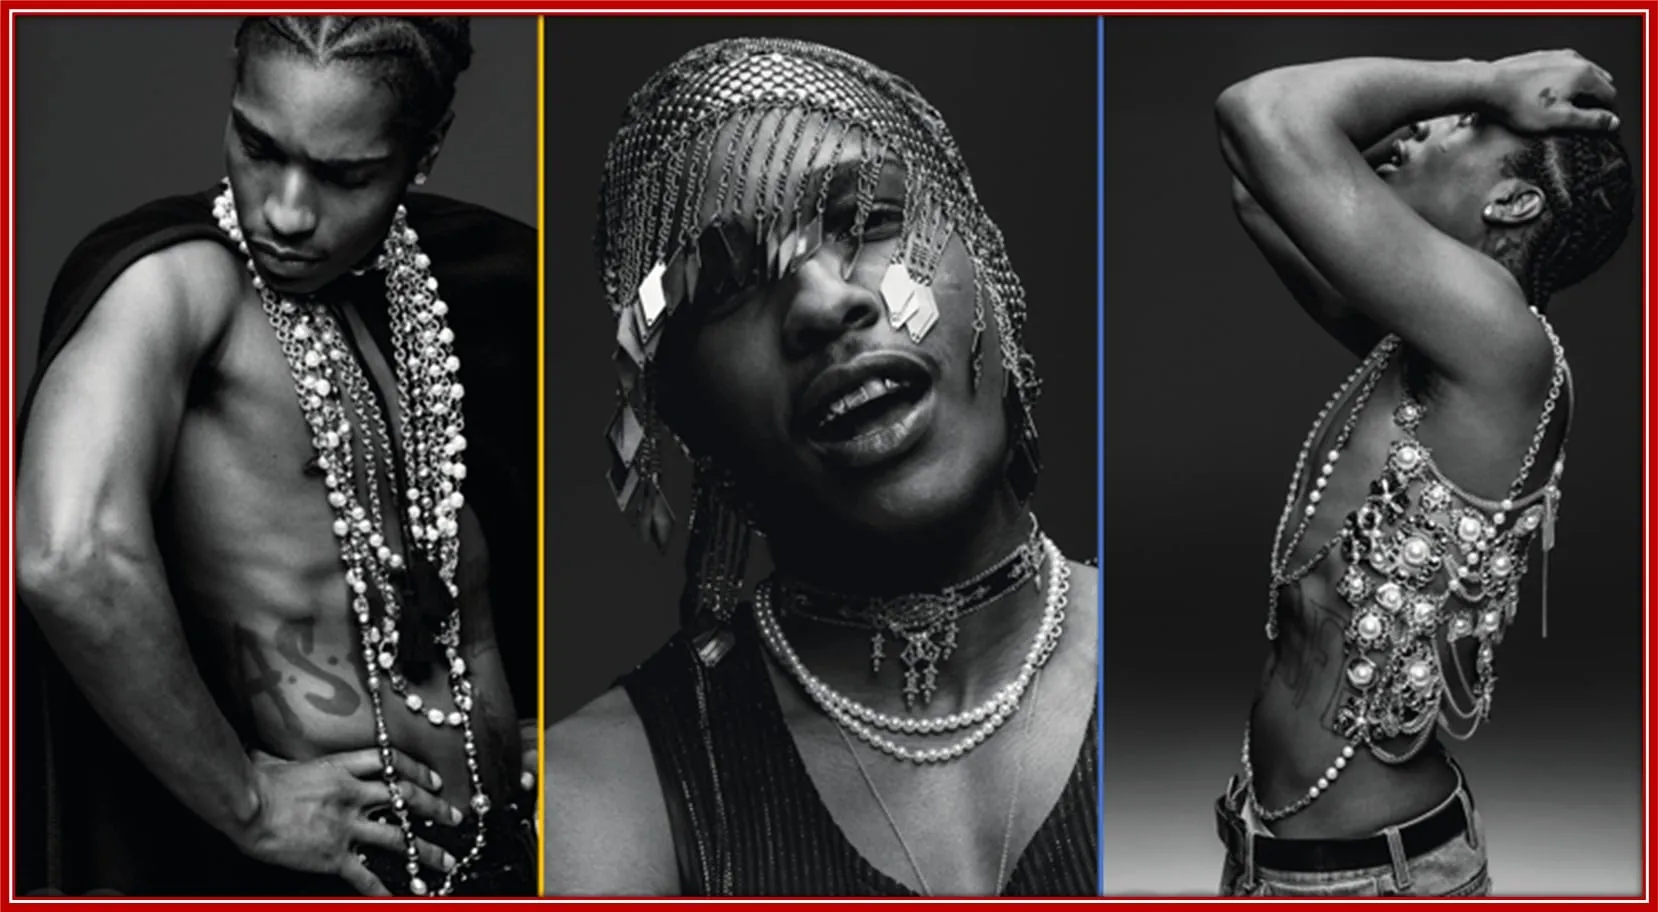 ASAP Rocky, demonstrating that men can have fun with jewellery.